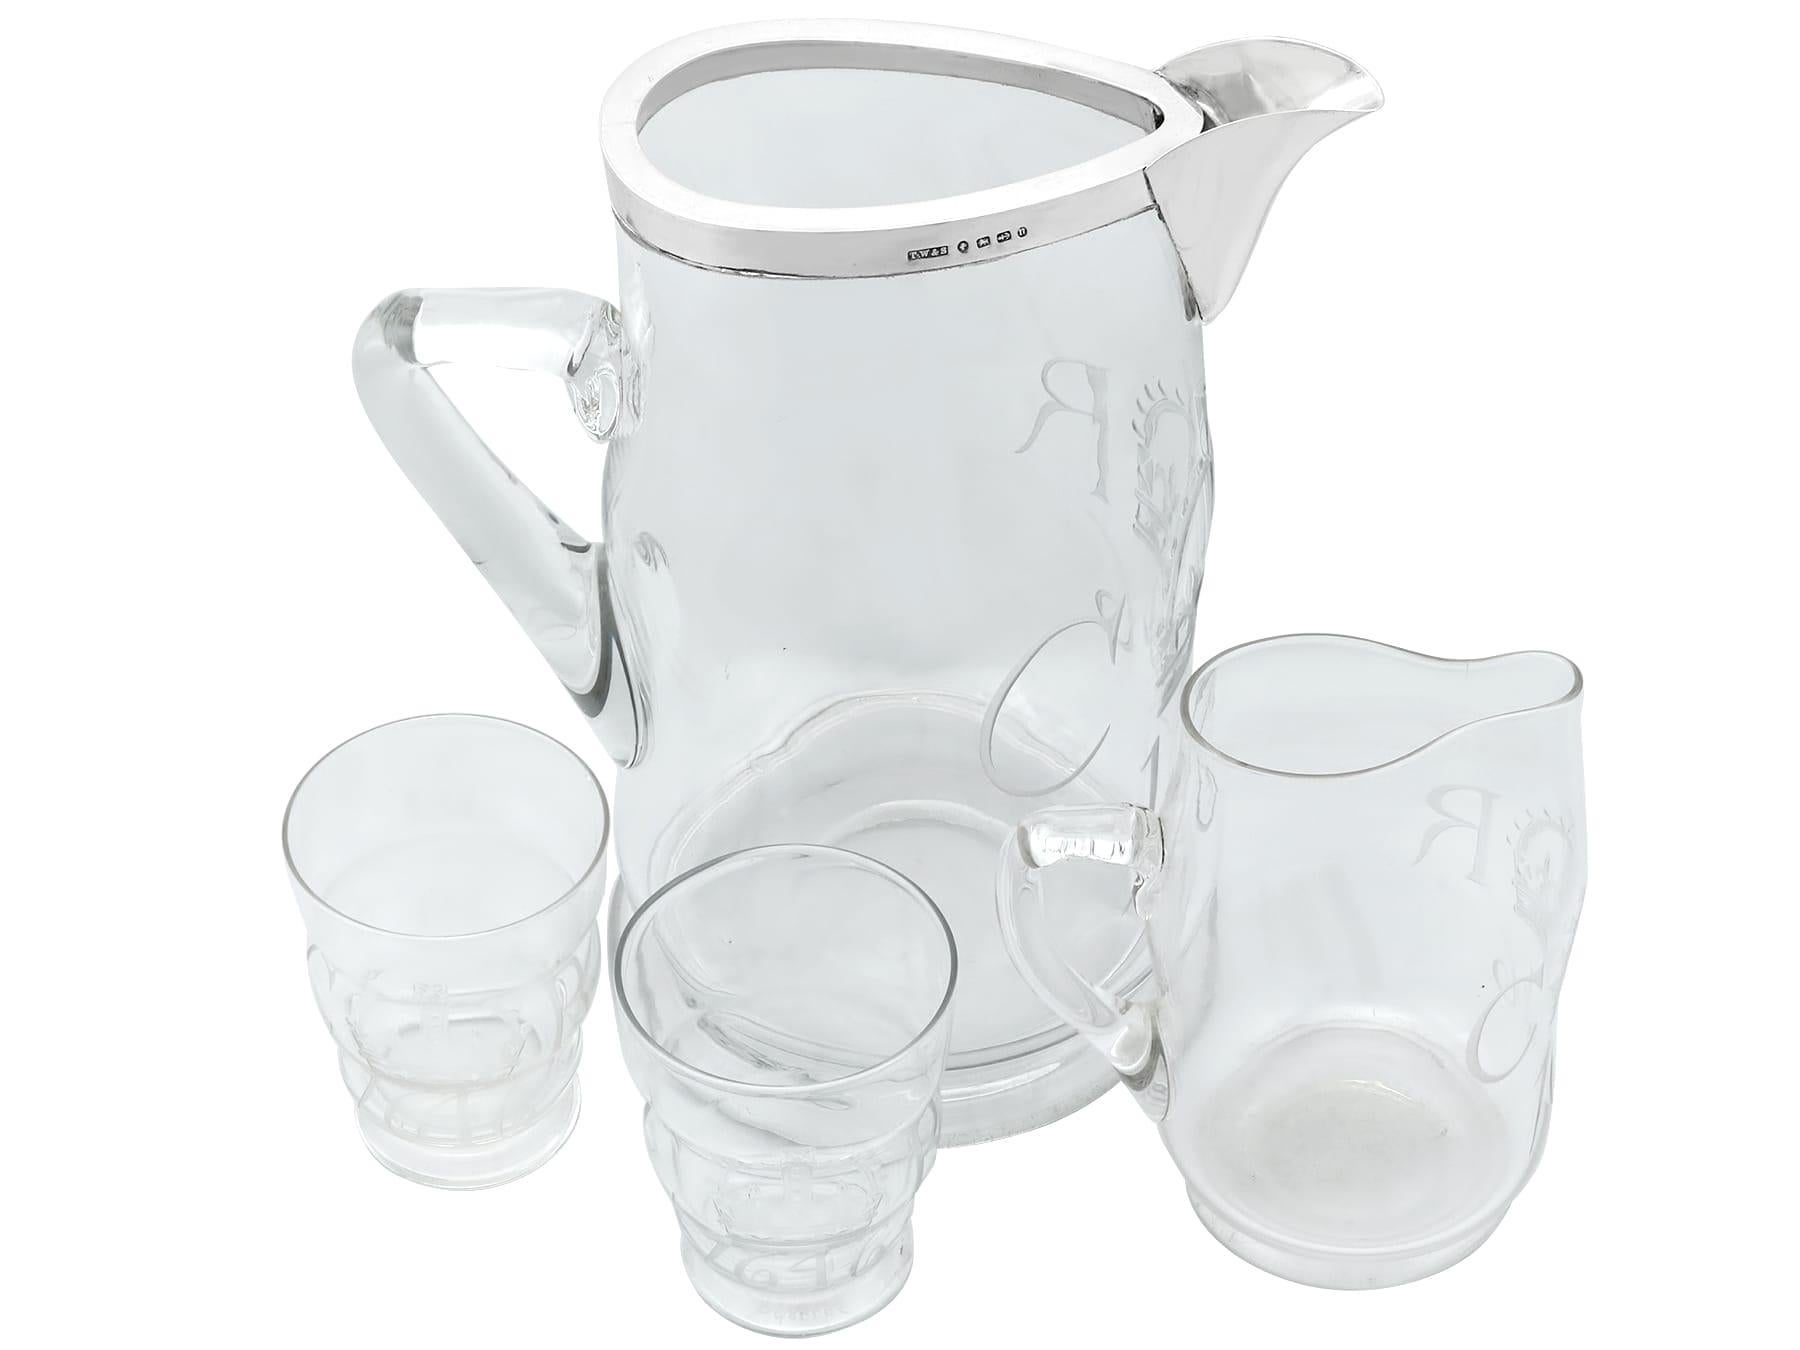 A very fine and impressive antique Victorian English sterling silver and glass water jug with a matching pair of glass tumblers; an addition to our diverse glassware collection.

This fine and impressive antique Victorian sterling silver and glass